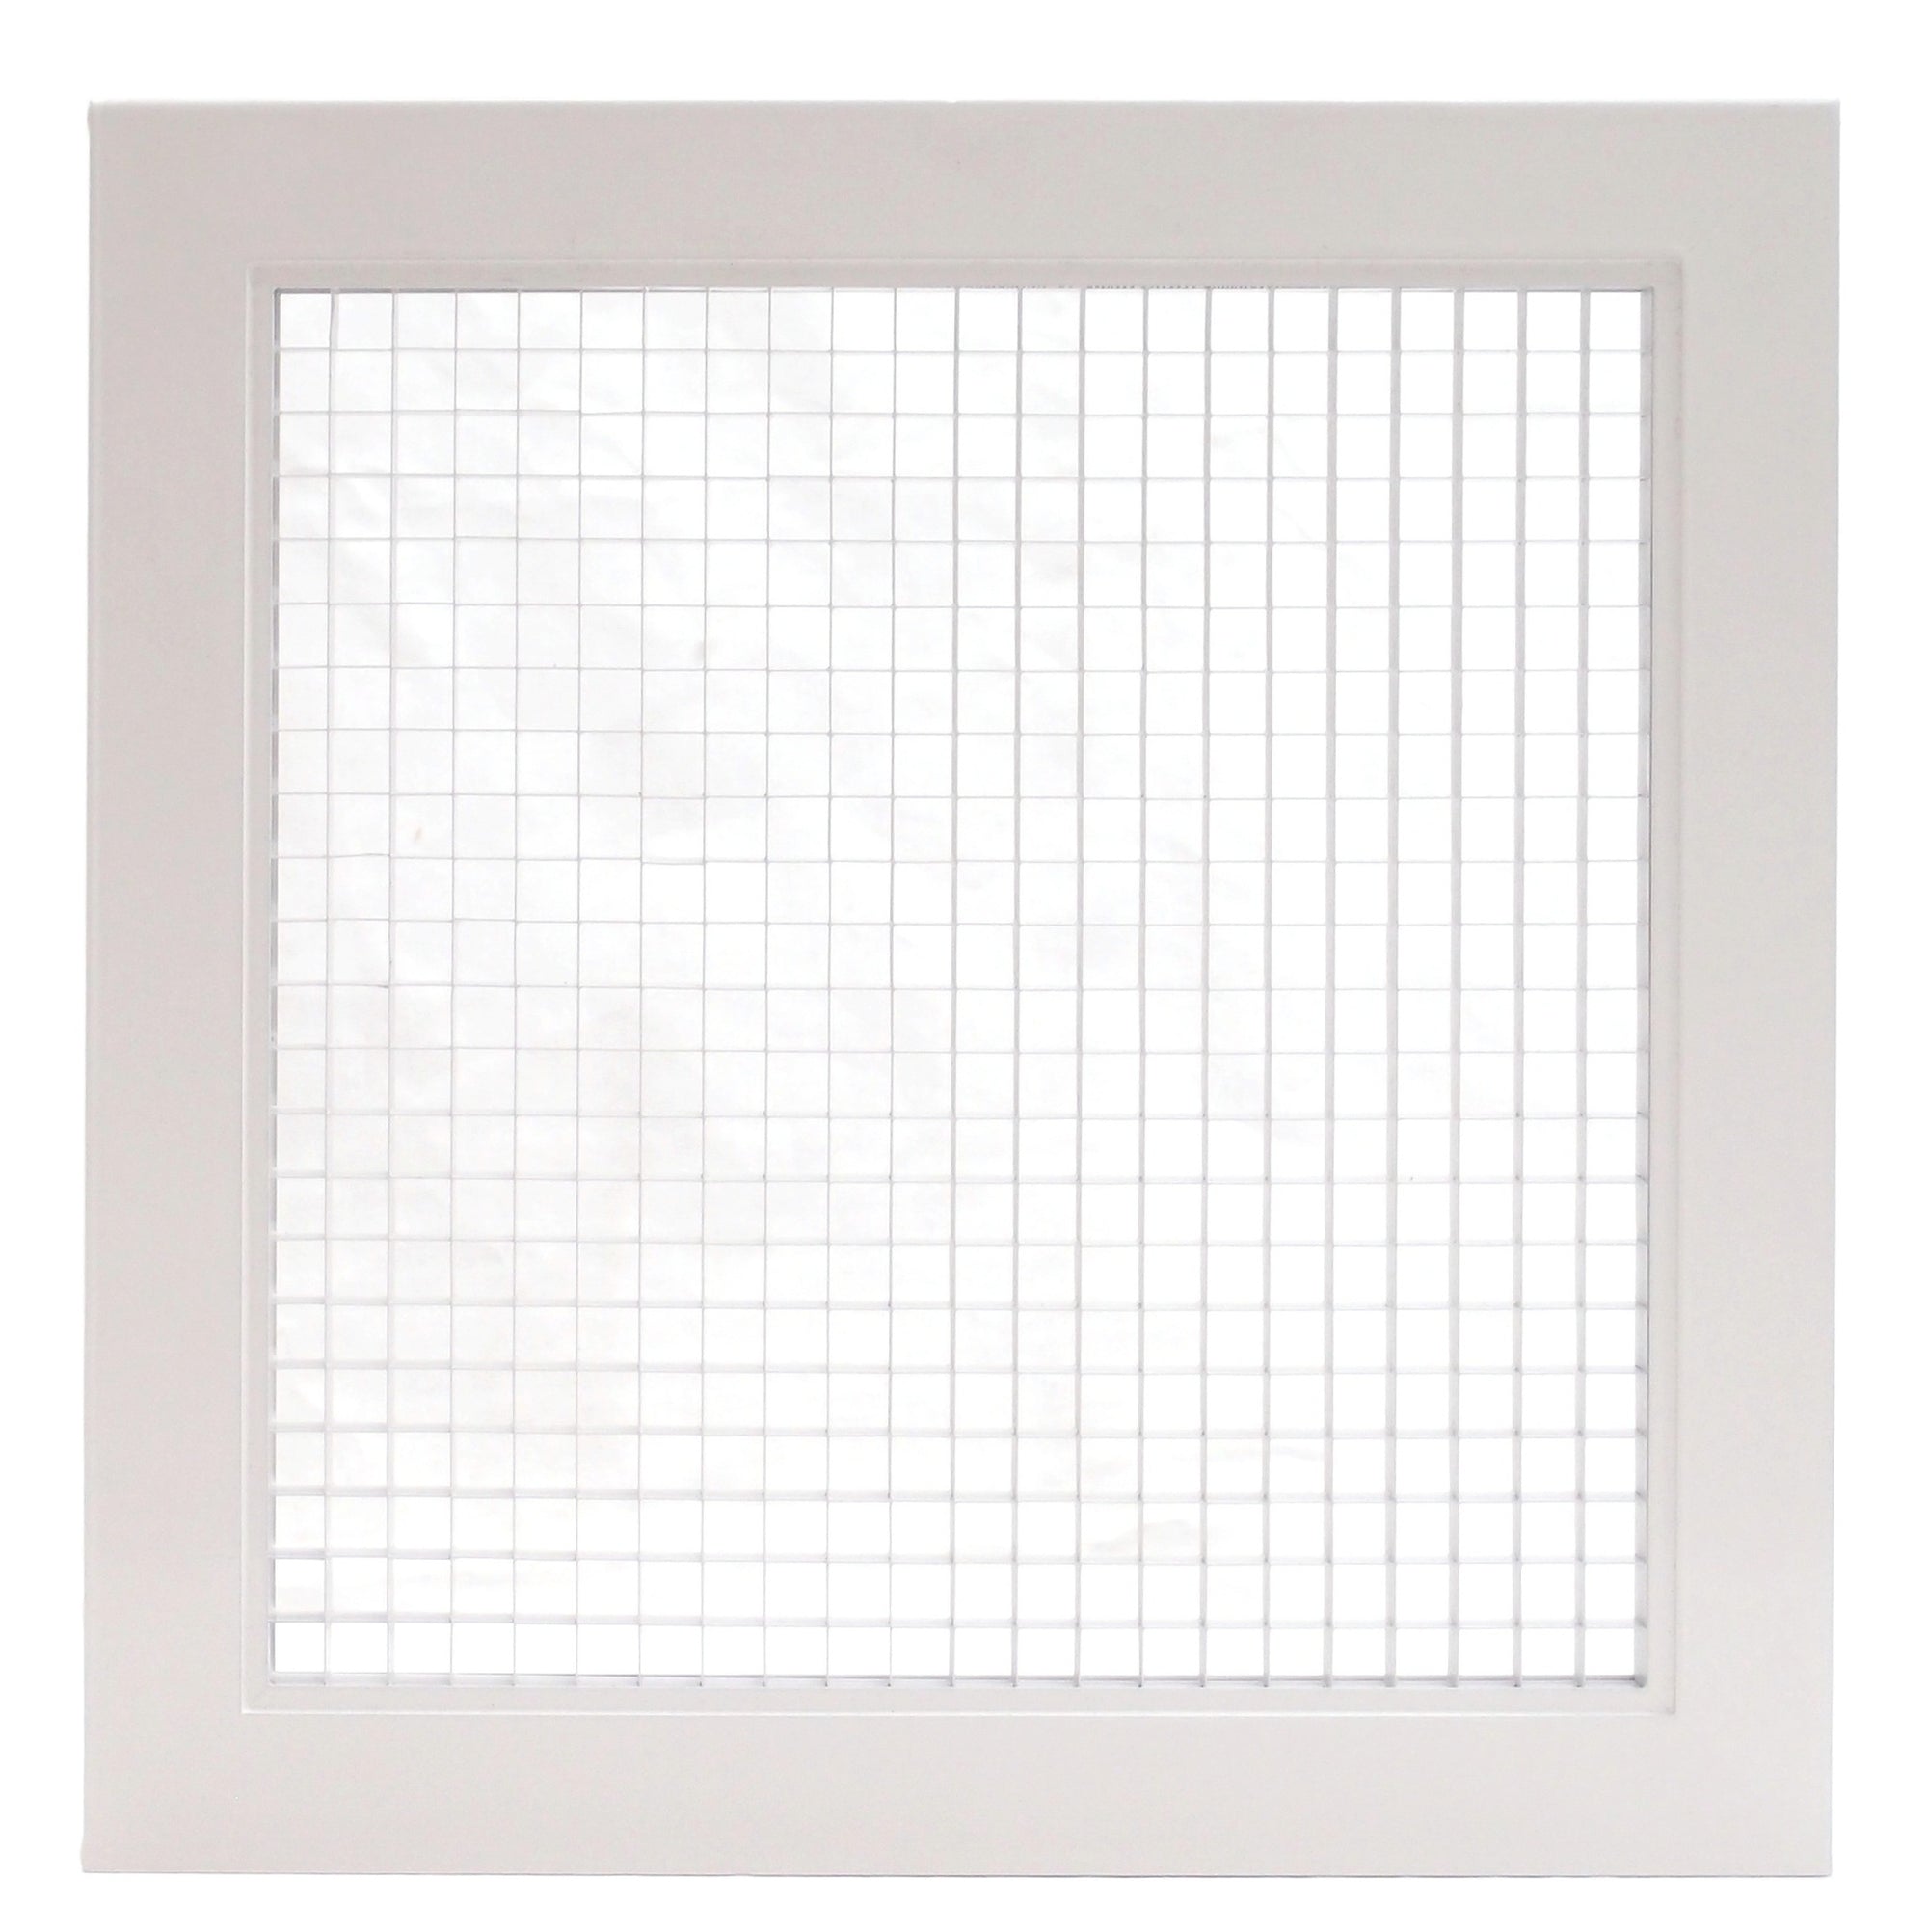 36" x 10" Cube Core Eggcrate Return Air Filter Grille for 1" Filter